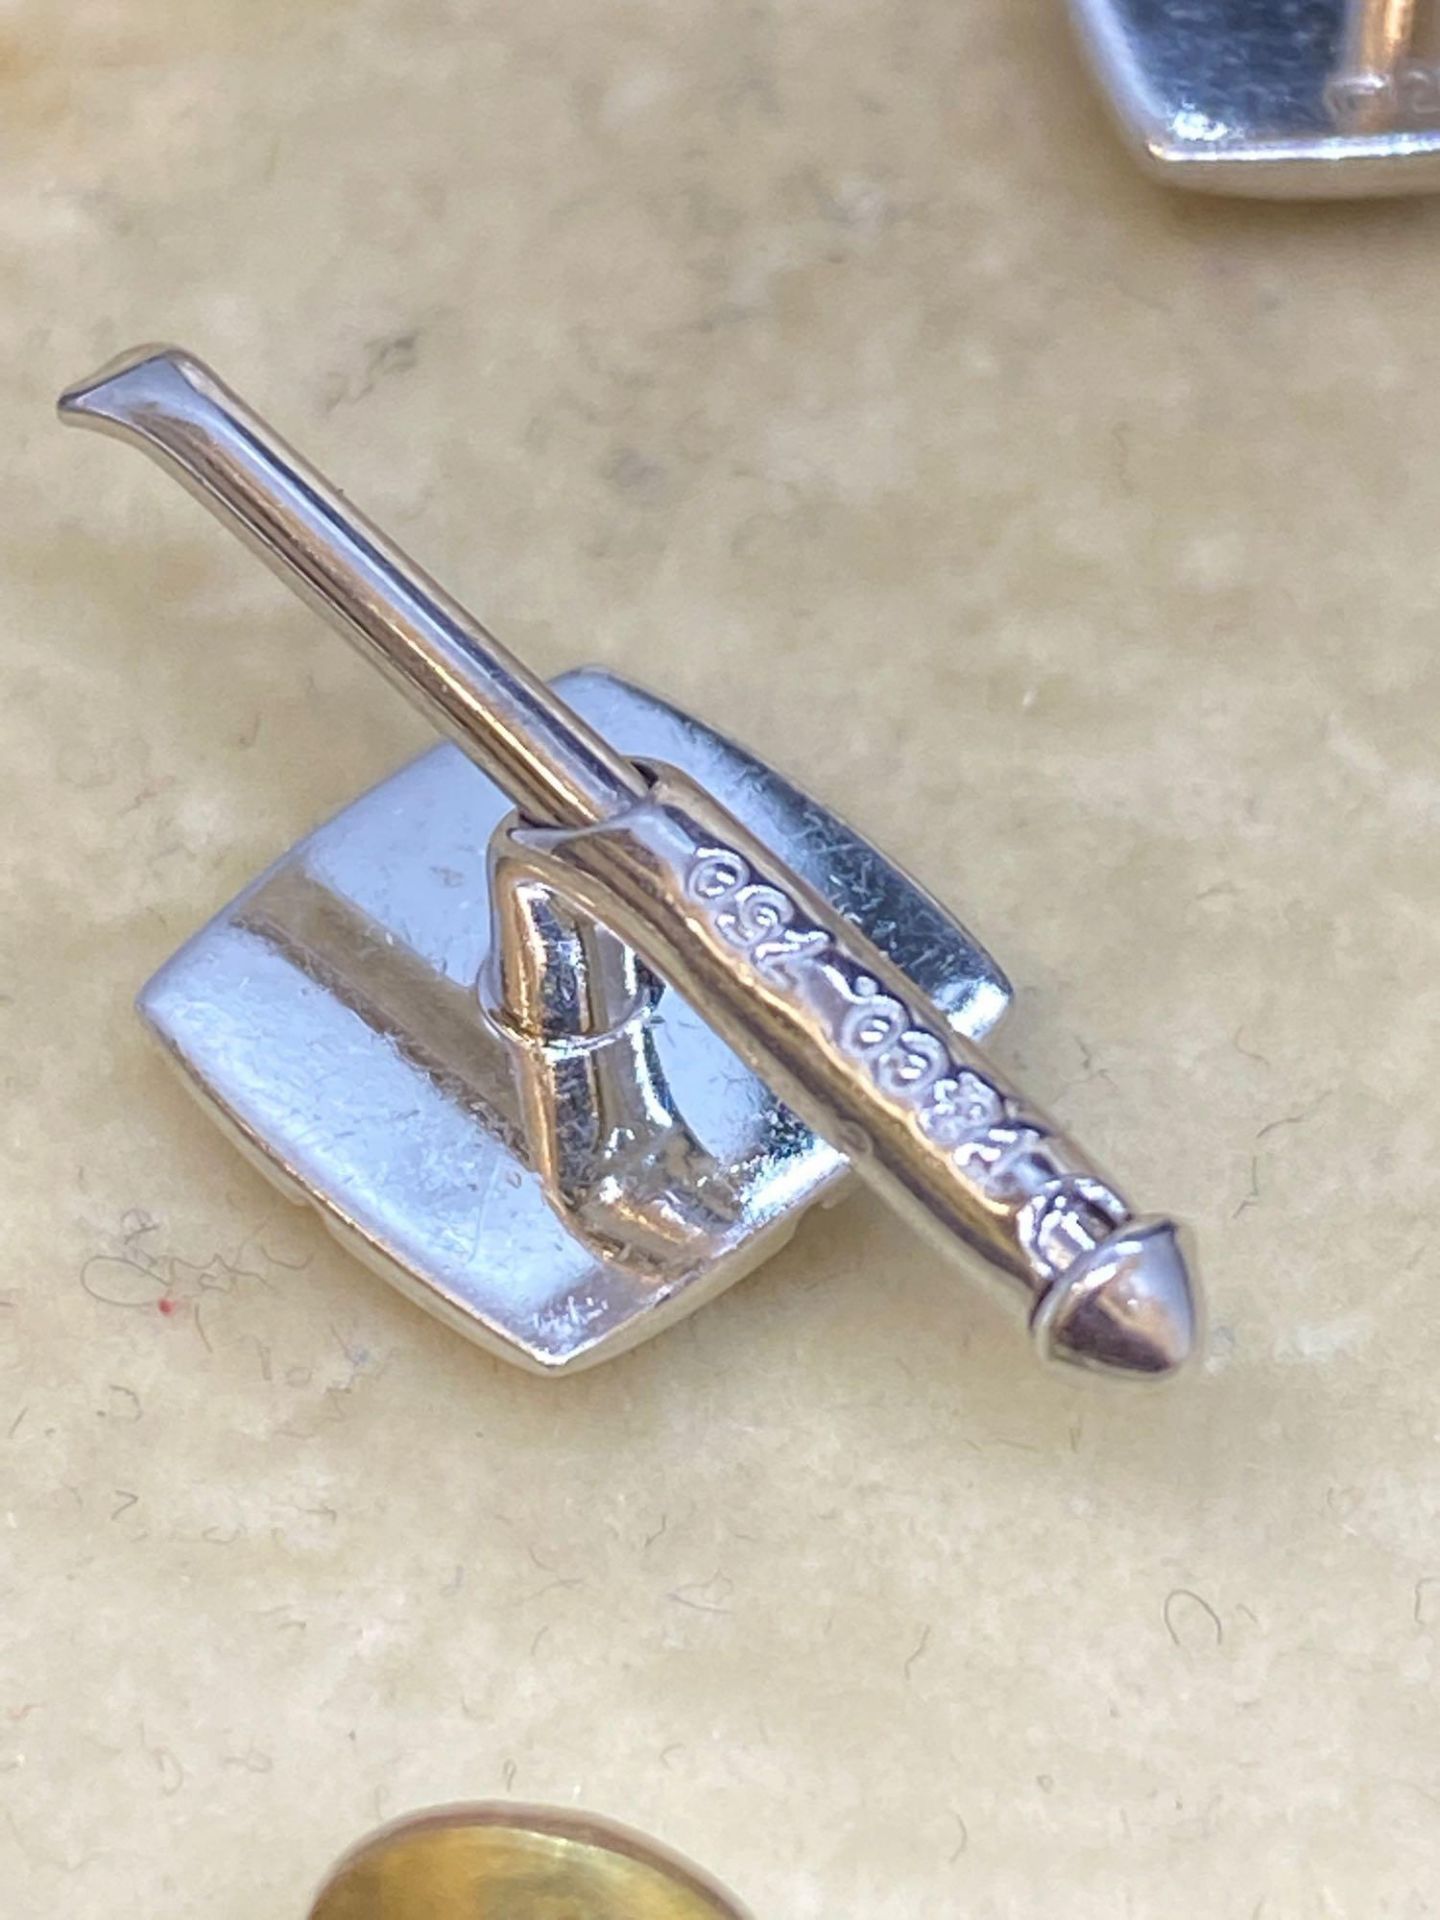 18ct White Gold Tiffany & Co Cuff Links and Matching Tie Pin - 23 Grams - Image 5 of 5